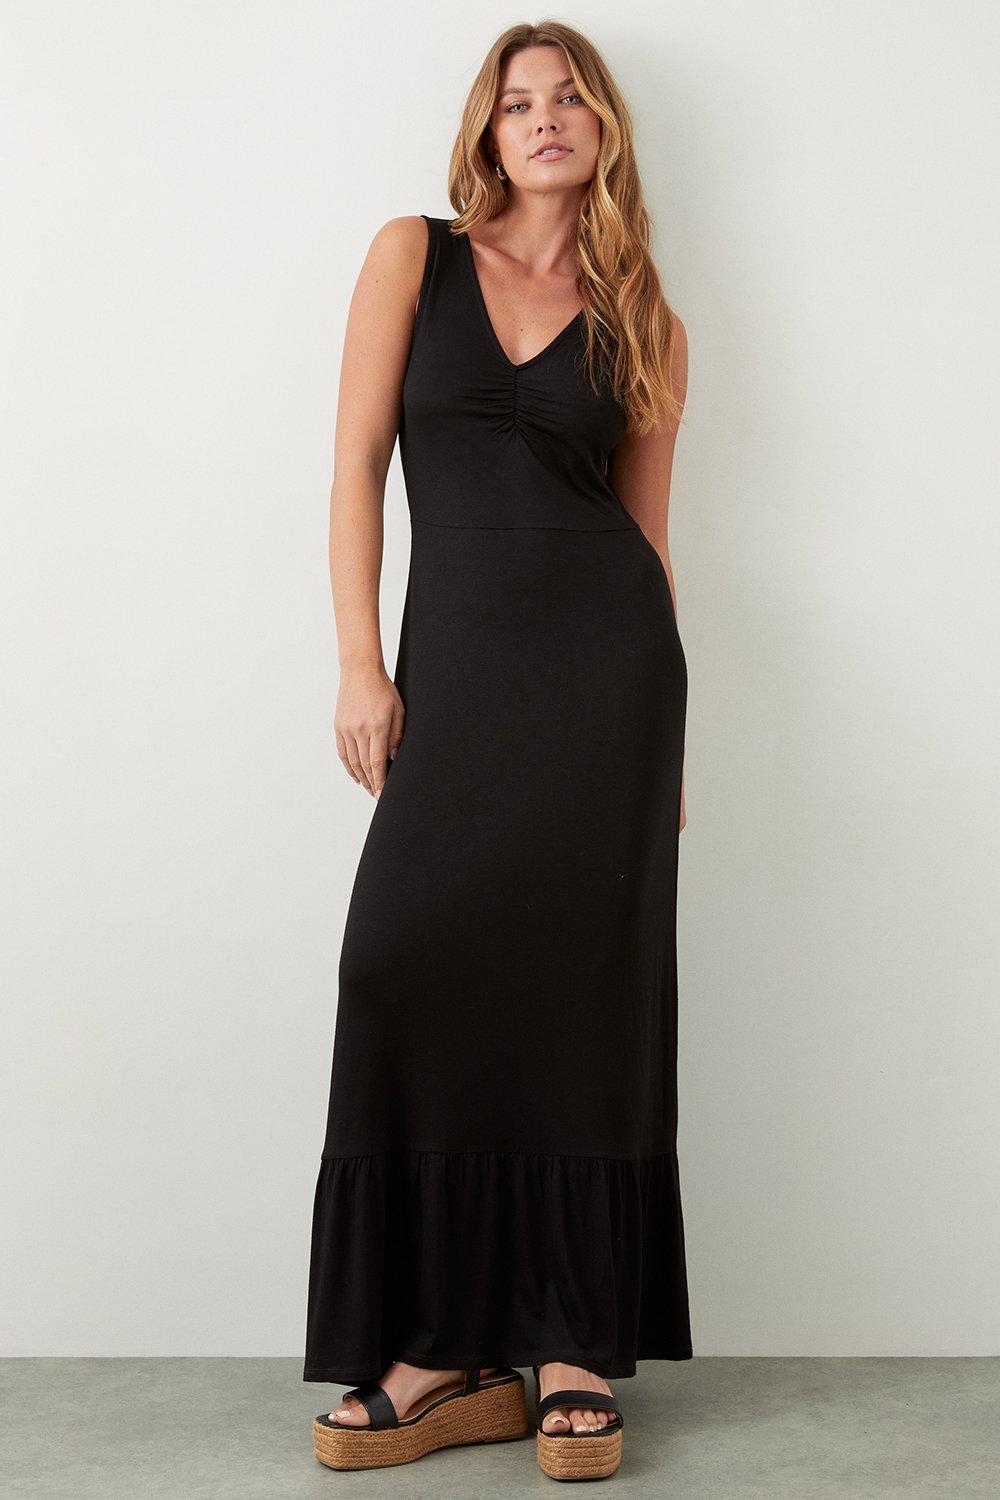 Women’s Black Ruched Front Maxi Dress - 12